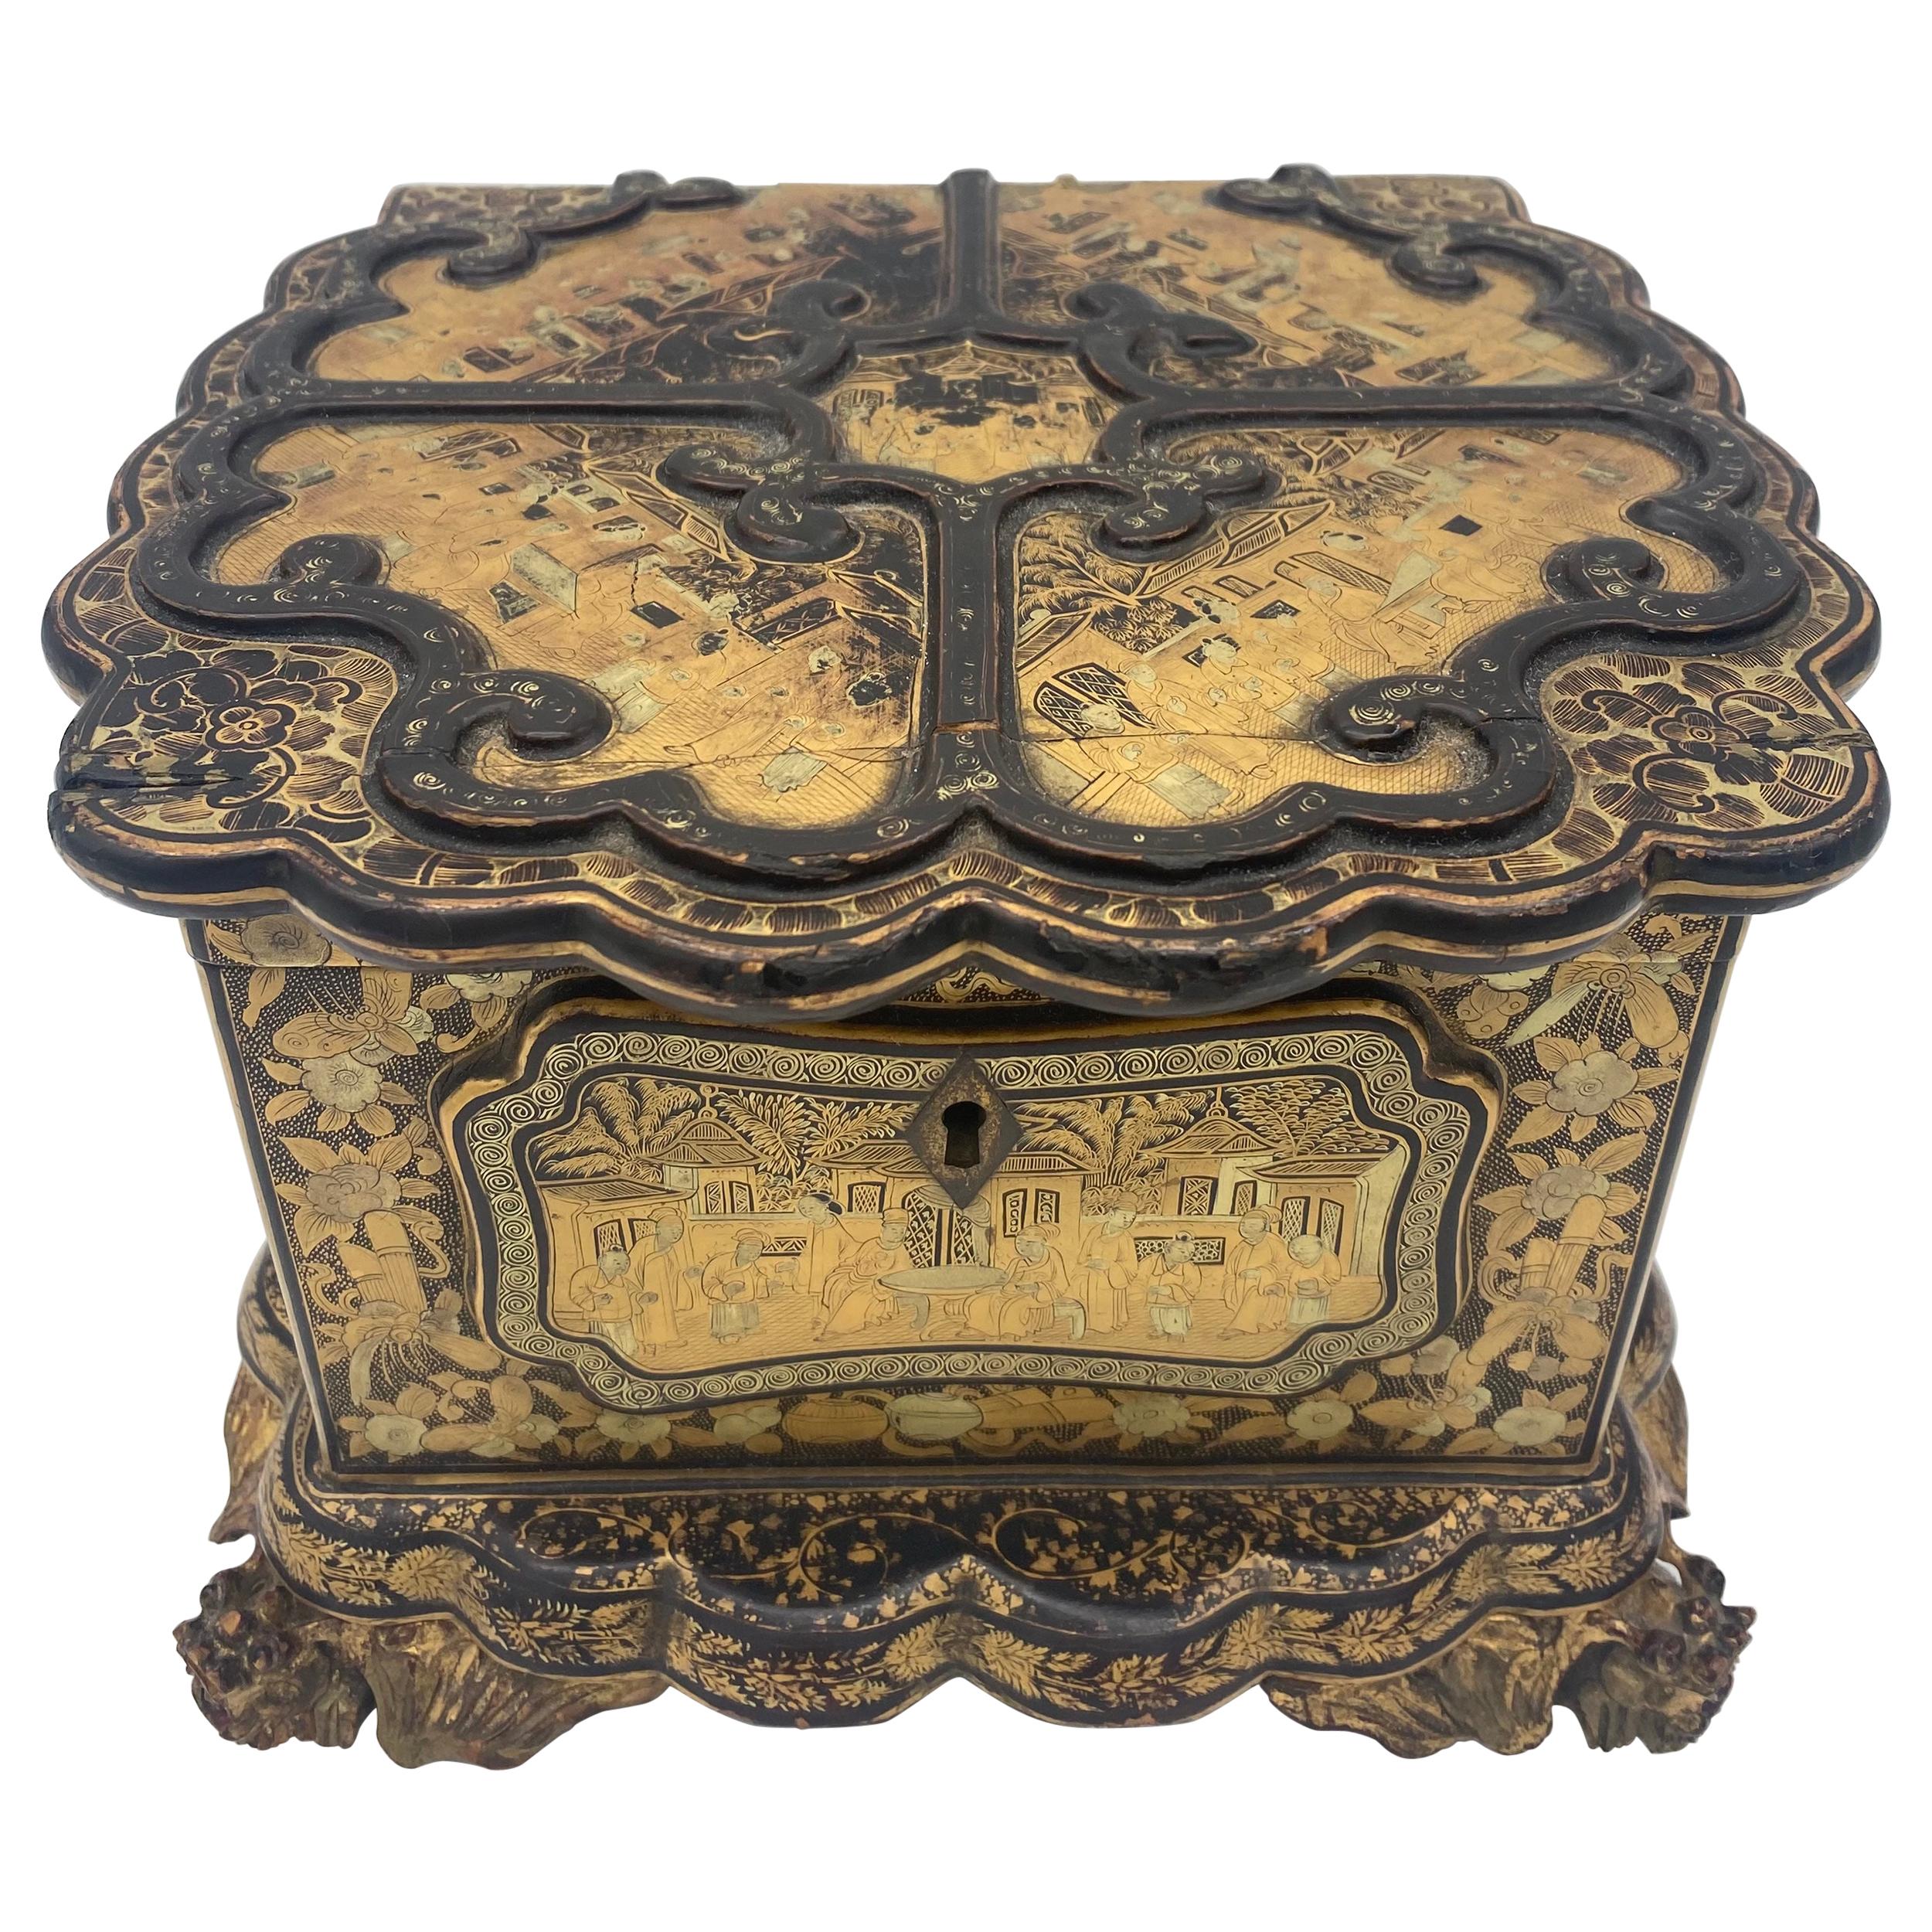 Unique 19th Century  Export Chinese Gilt Chinoiserie Lacquer Box